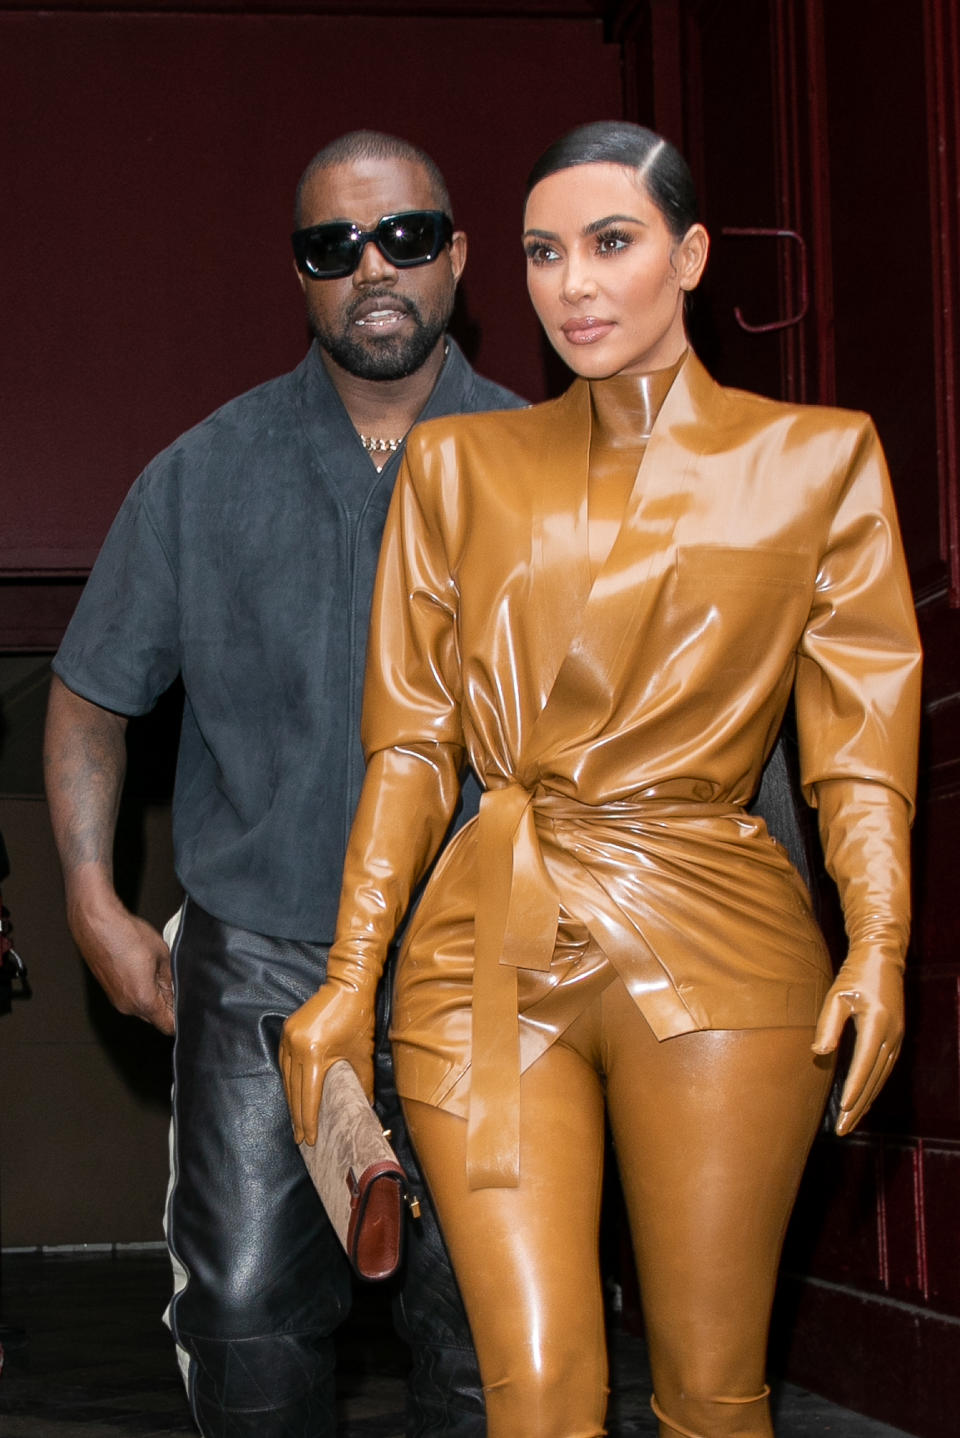 Kanye West and Kim Kardashian exiting a venue, Kim in a glossy metallic outfit with tied waist, Kanye in a grey shirt